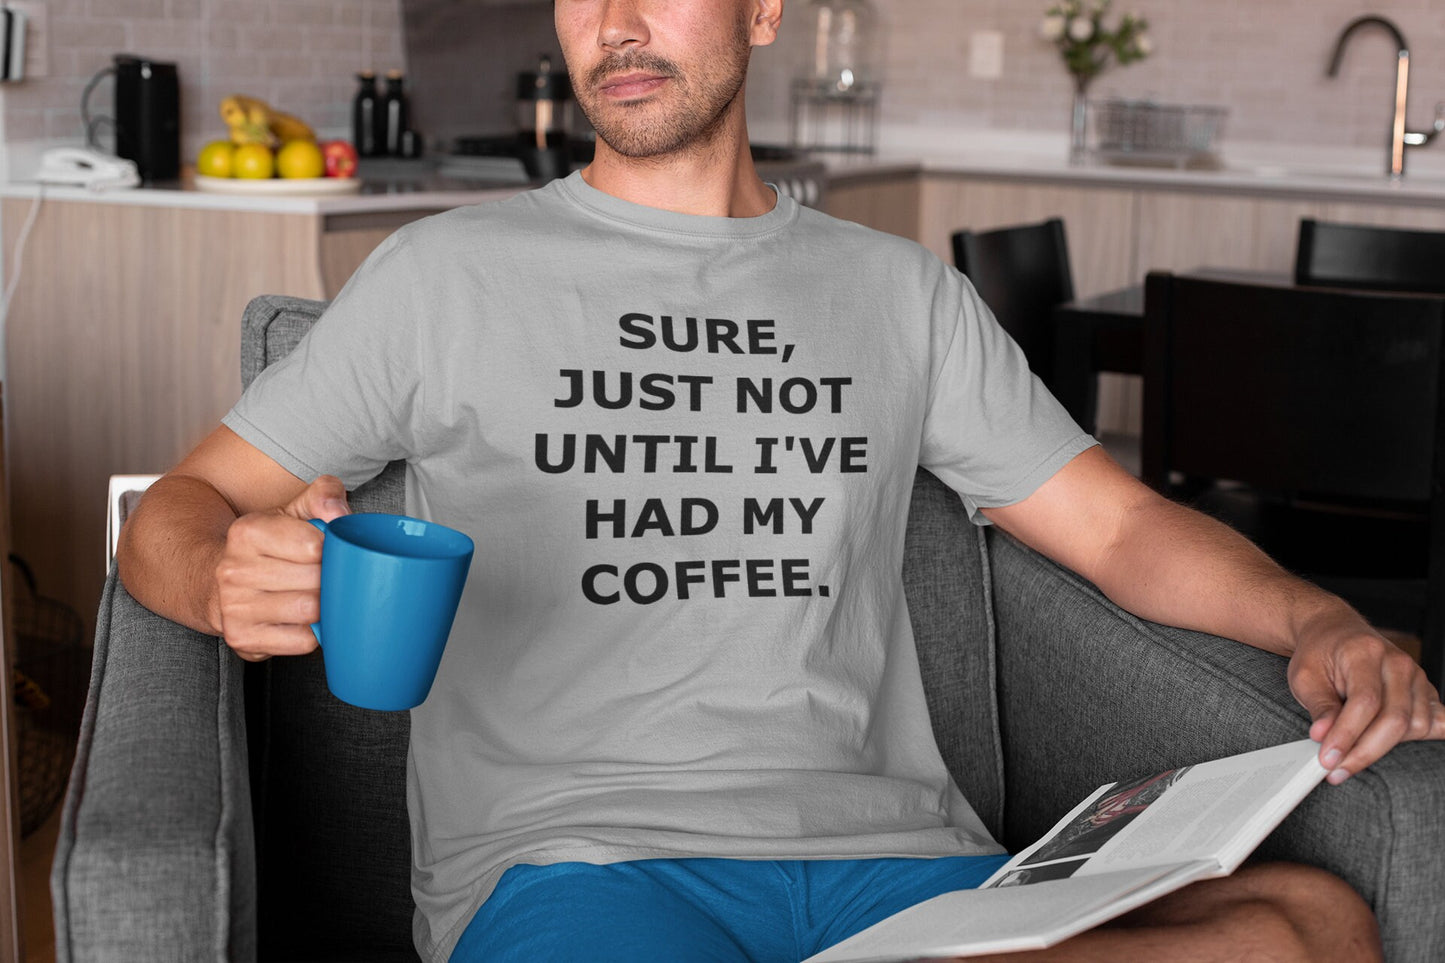 Sure Just Not Until I've Had My Coffee Shirt, Coffee Lover Shirt, Funny Coffee Shirt, Unisex Coffee Shirt, Iced Coffee Shirt